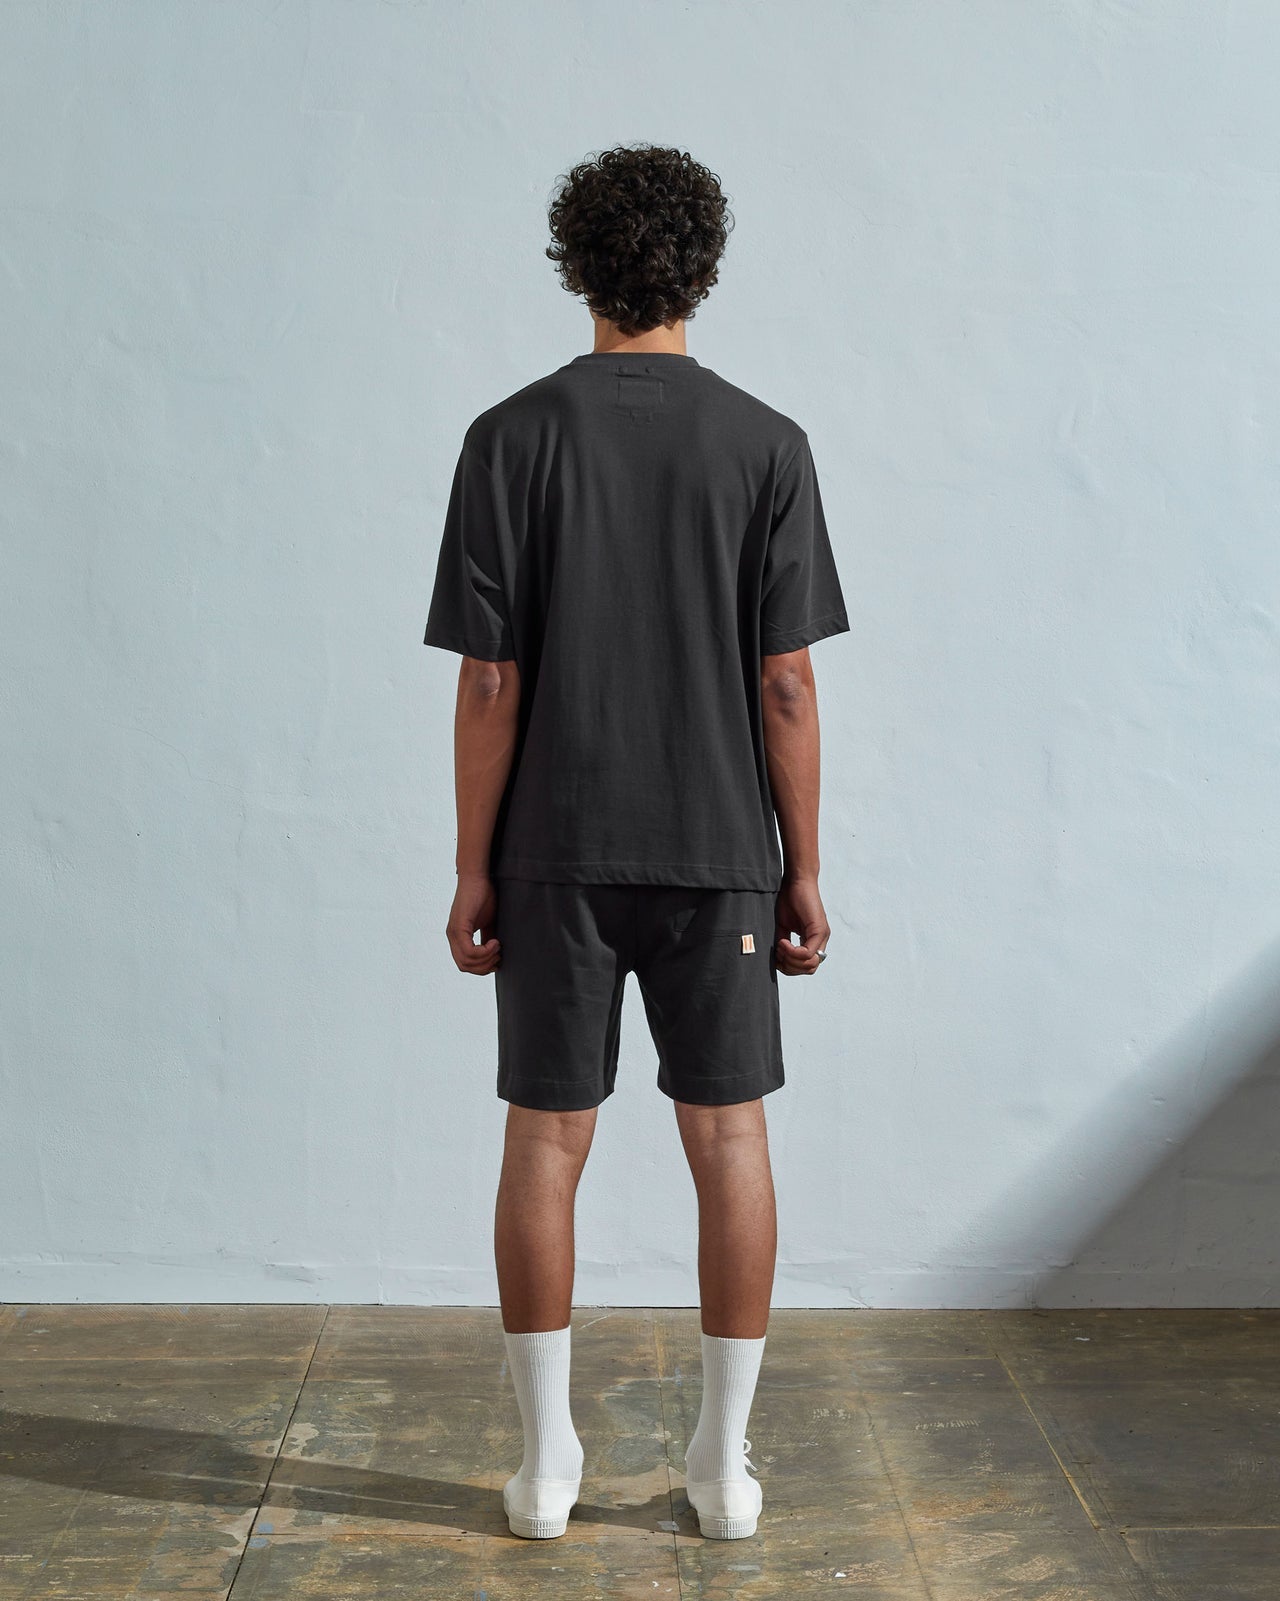 Uskees #7008 Faded Black Oversized T-shirt